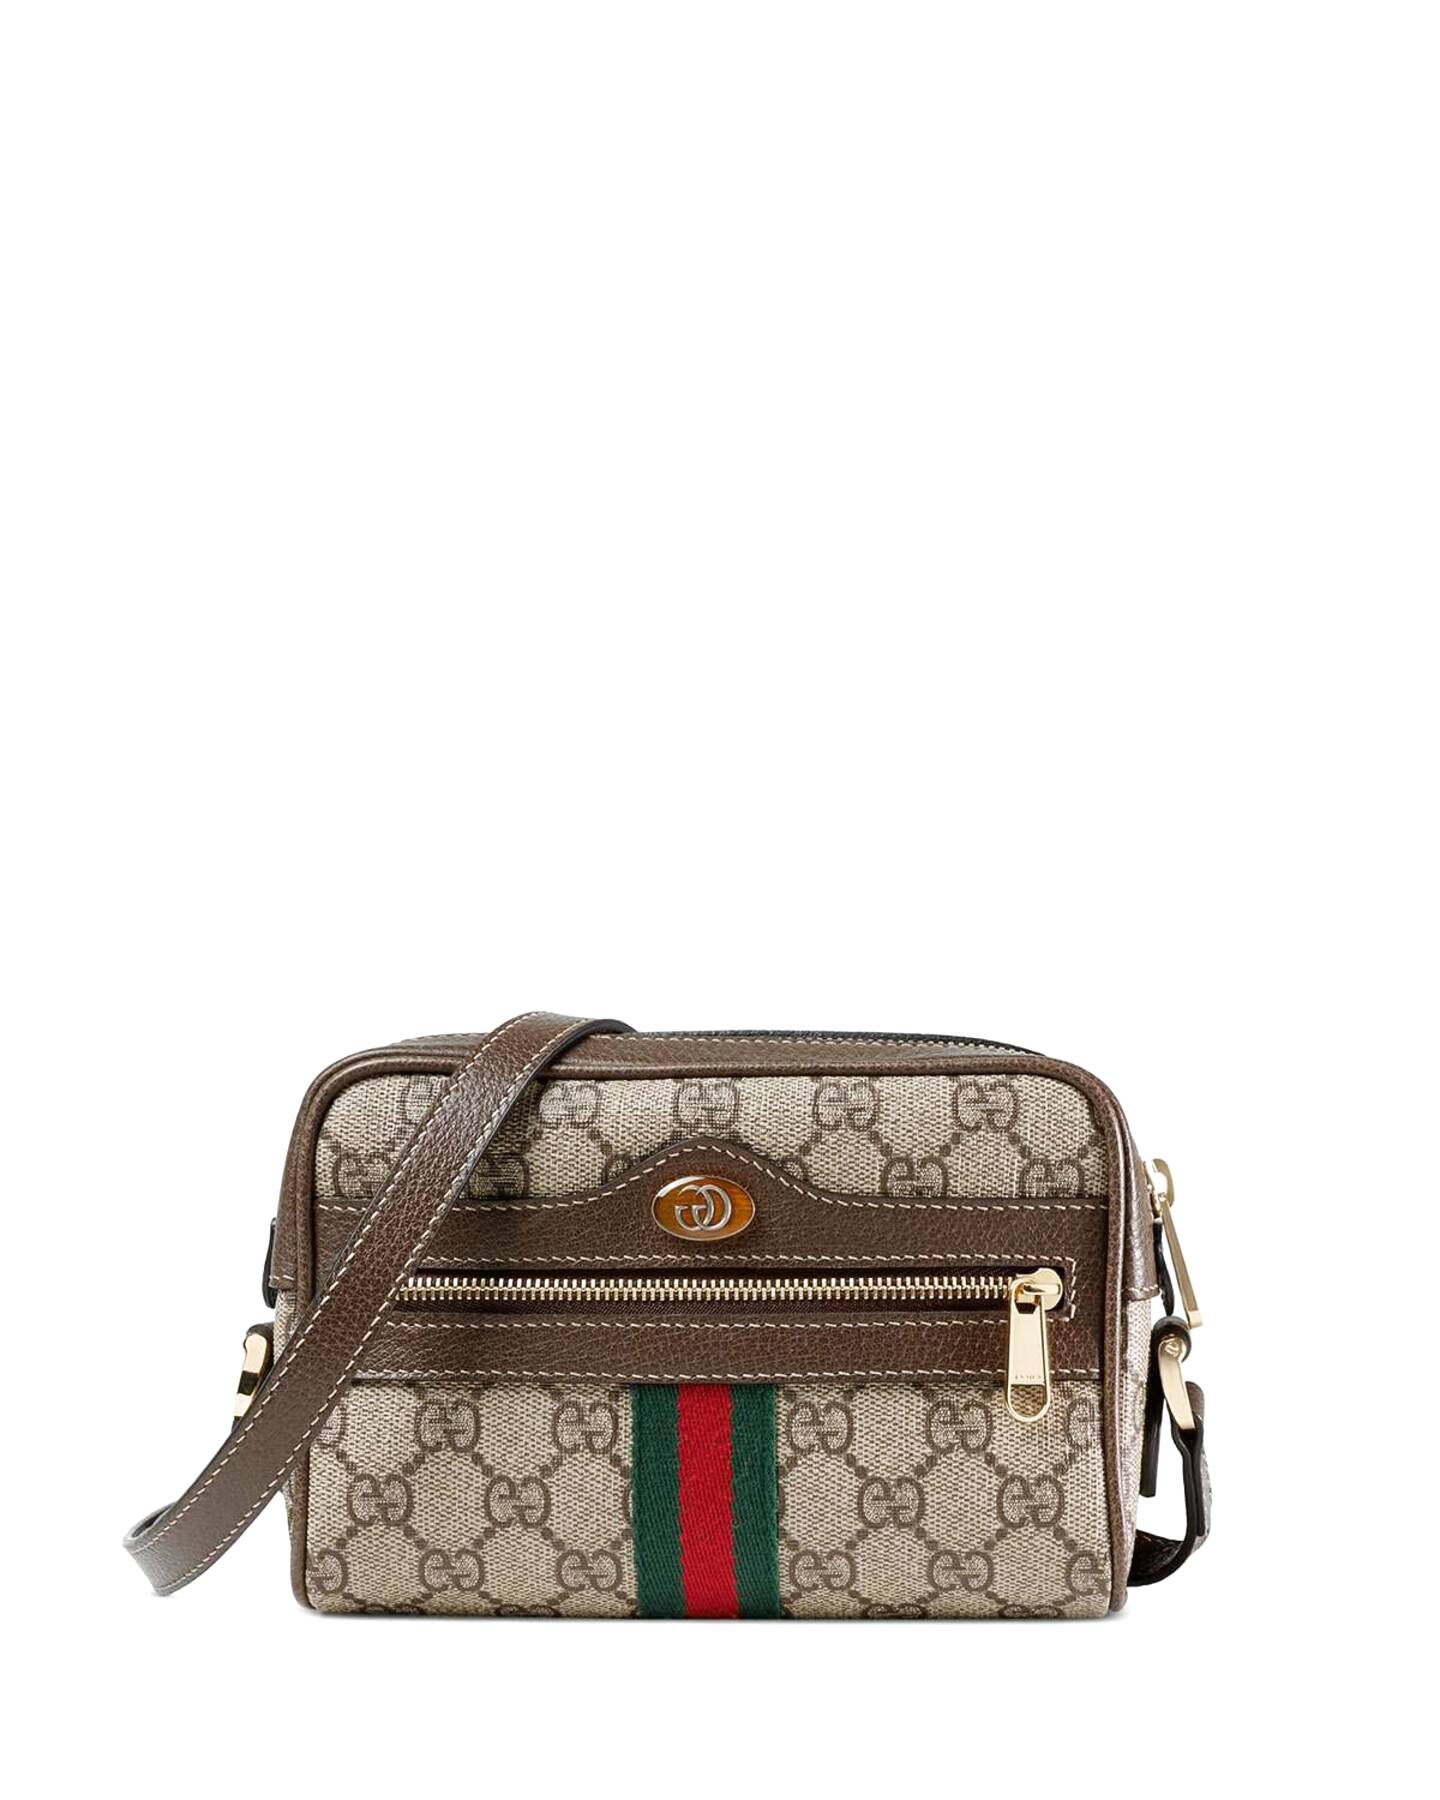 Gucci Crossbody Bag for sale in UK | 58 used Gucci Crossbody Bags